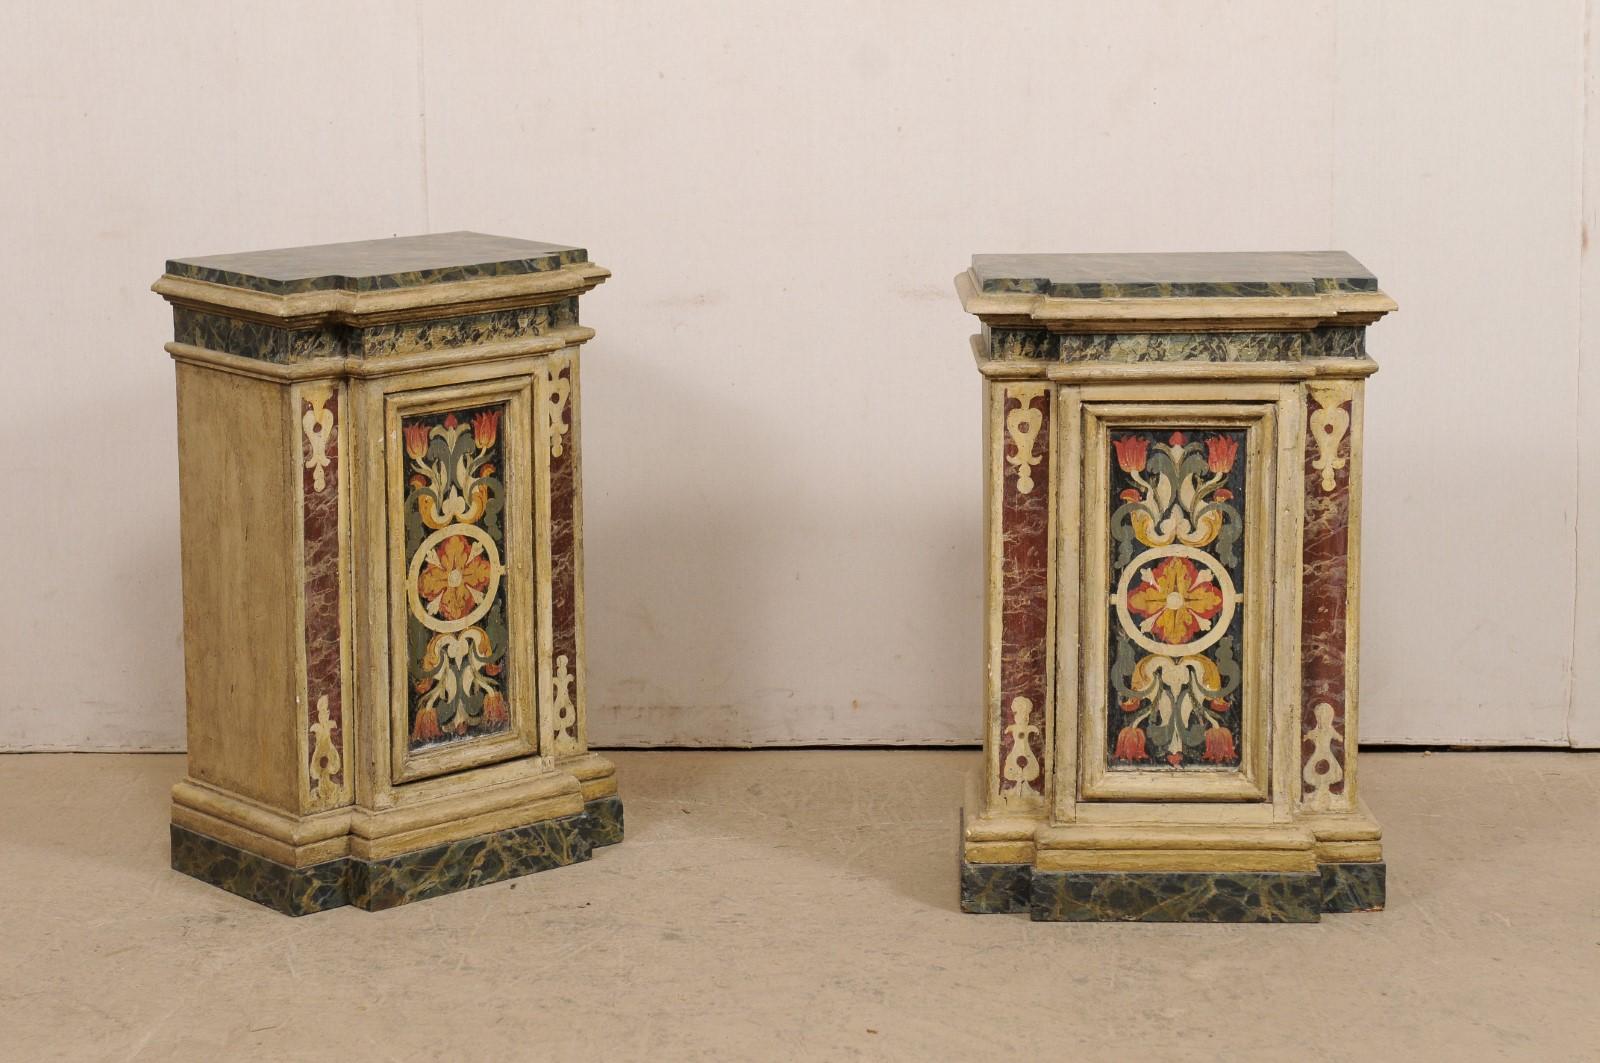 An Italian pair of wooden pedestals, with their original artisan paint, from the turn of the 18th and 19th century. This antique pair of wood columns from Italy each have break-front shaped bodies which feature a single recessed panel at each front